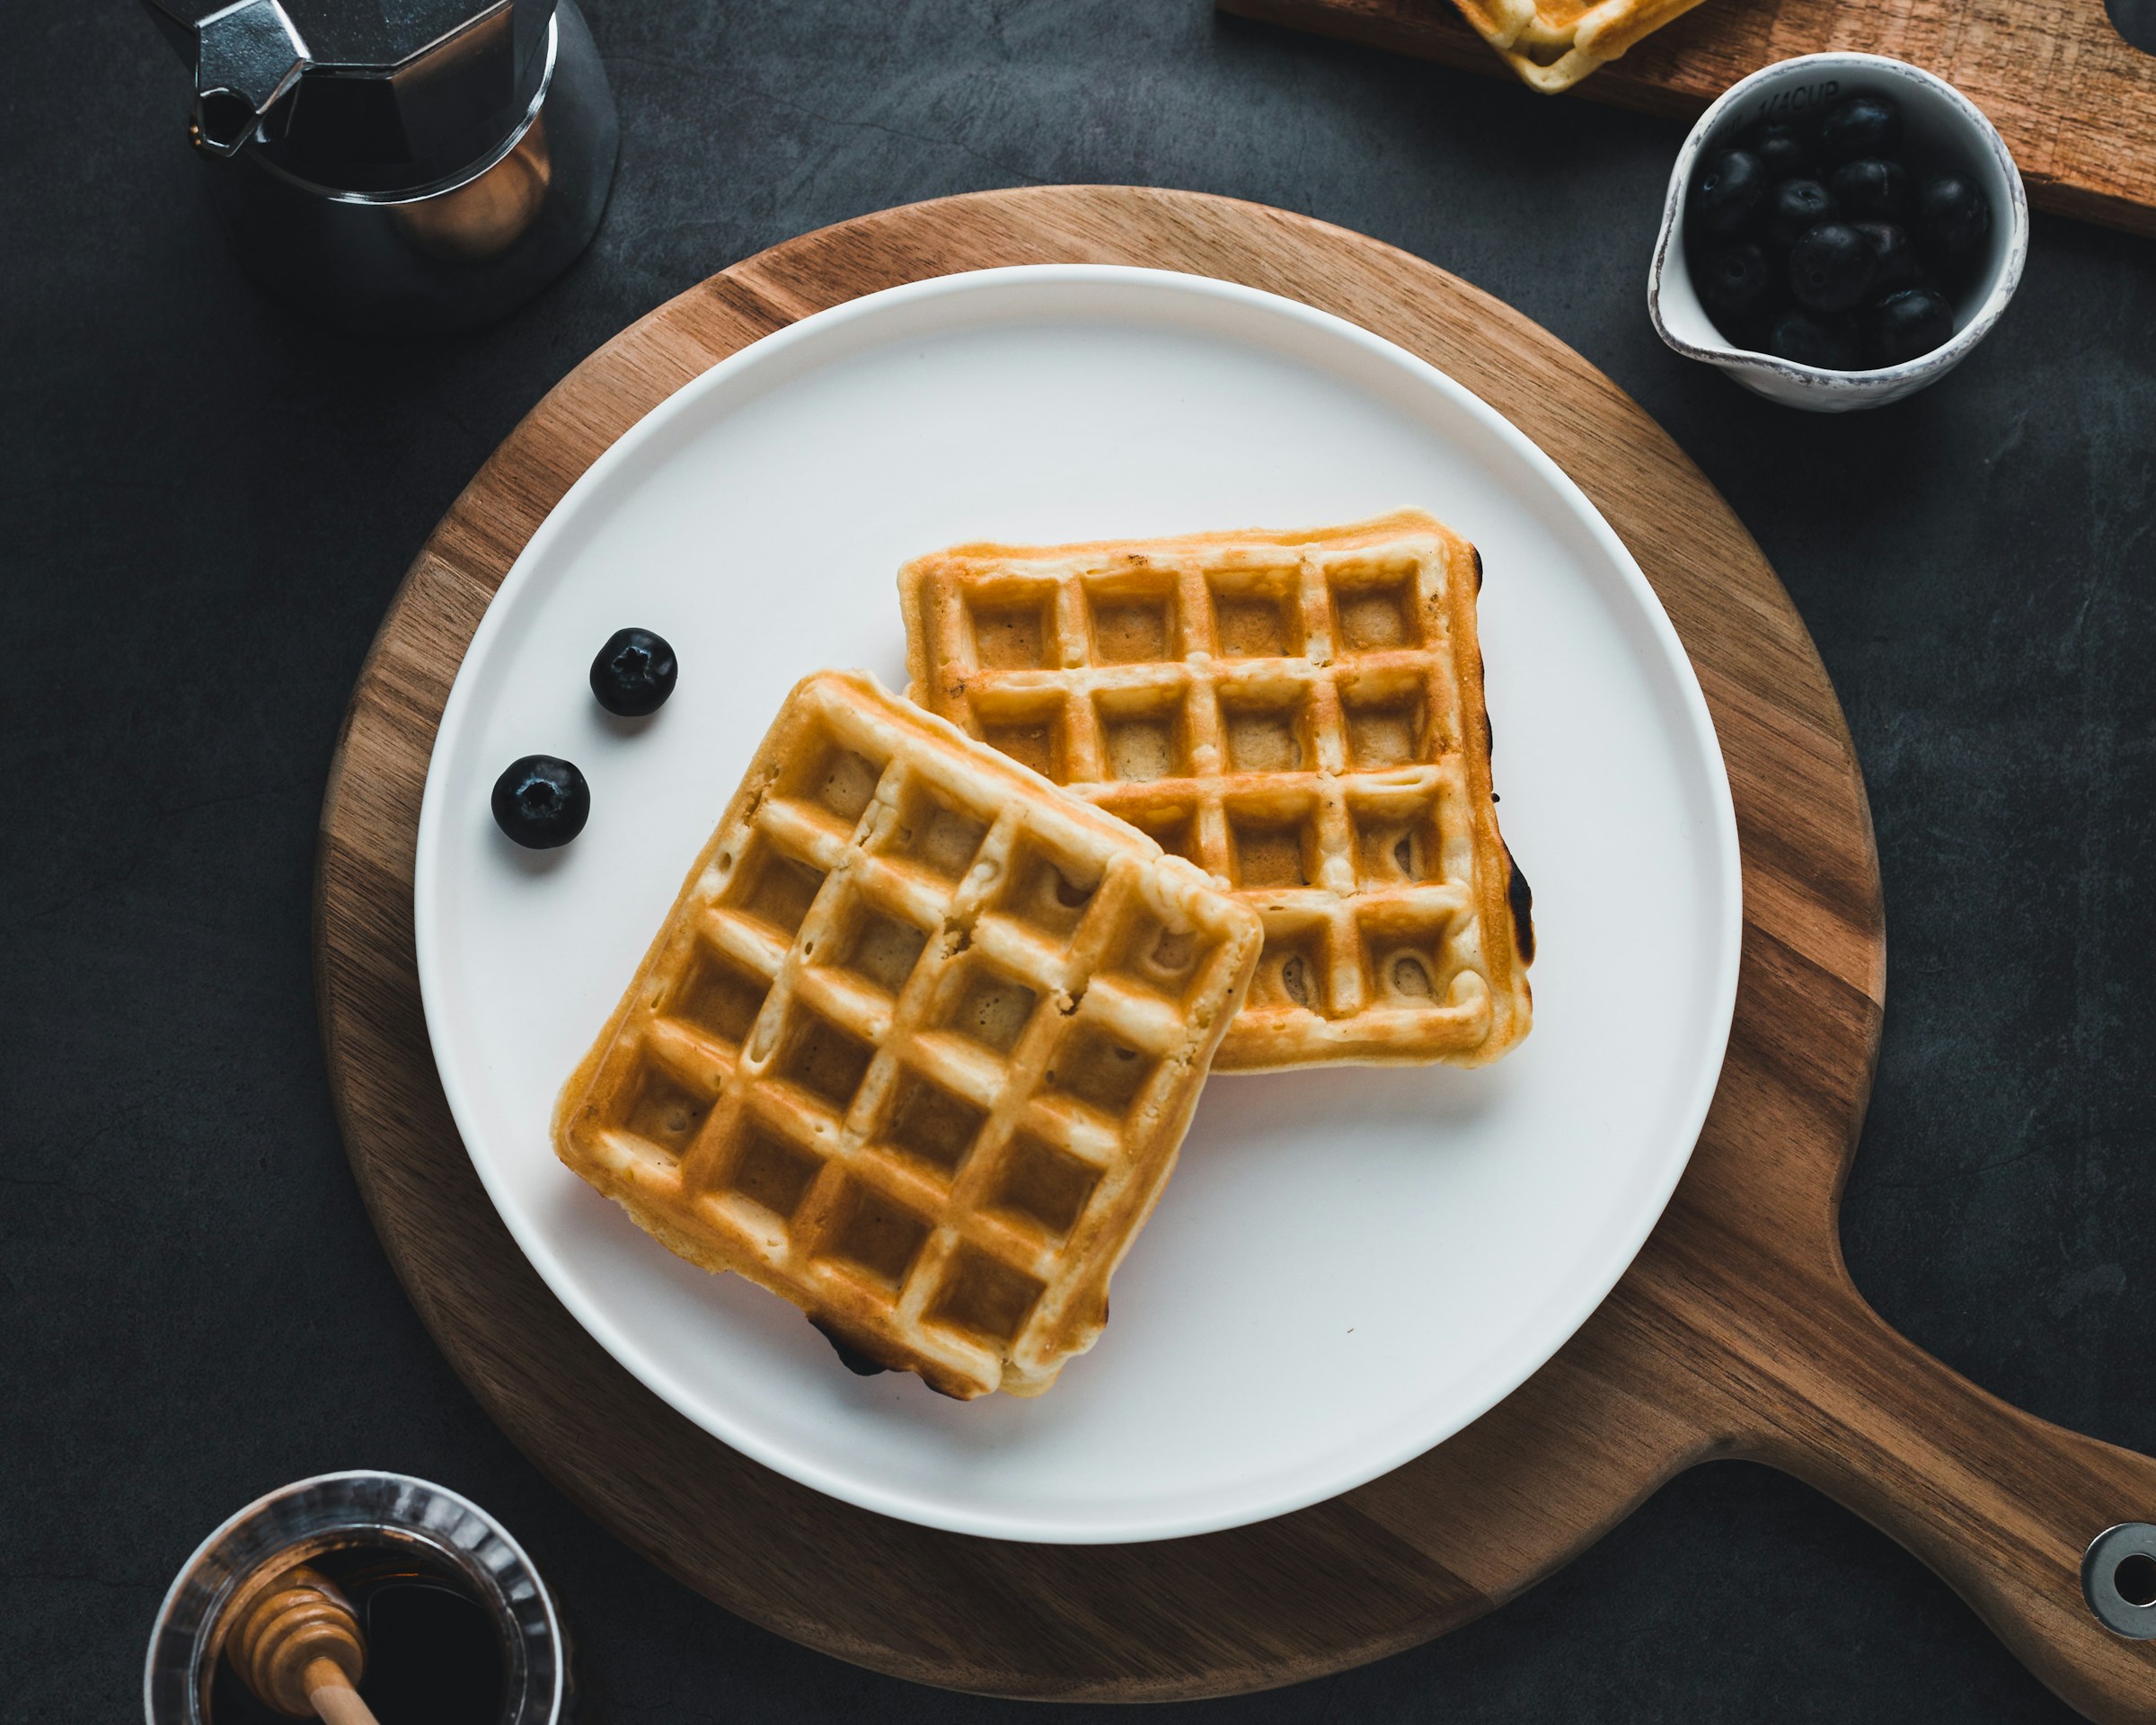 Waffles and blueberries on a plate | Source: Unsplash